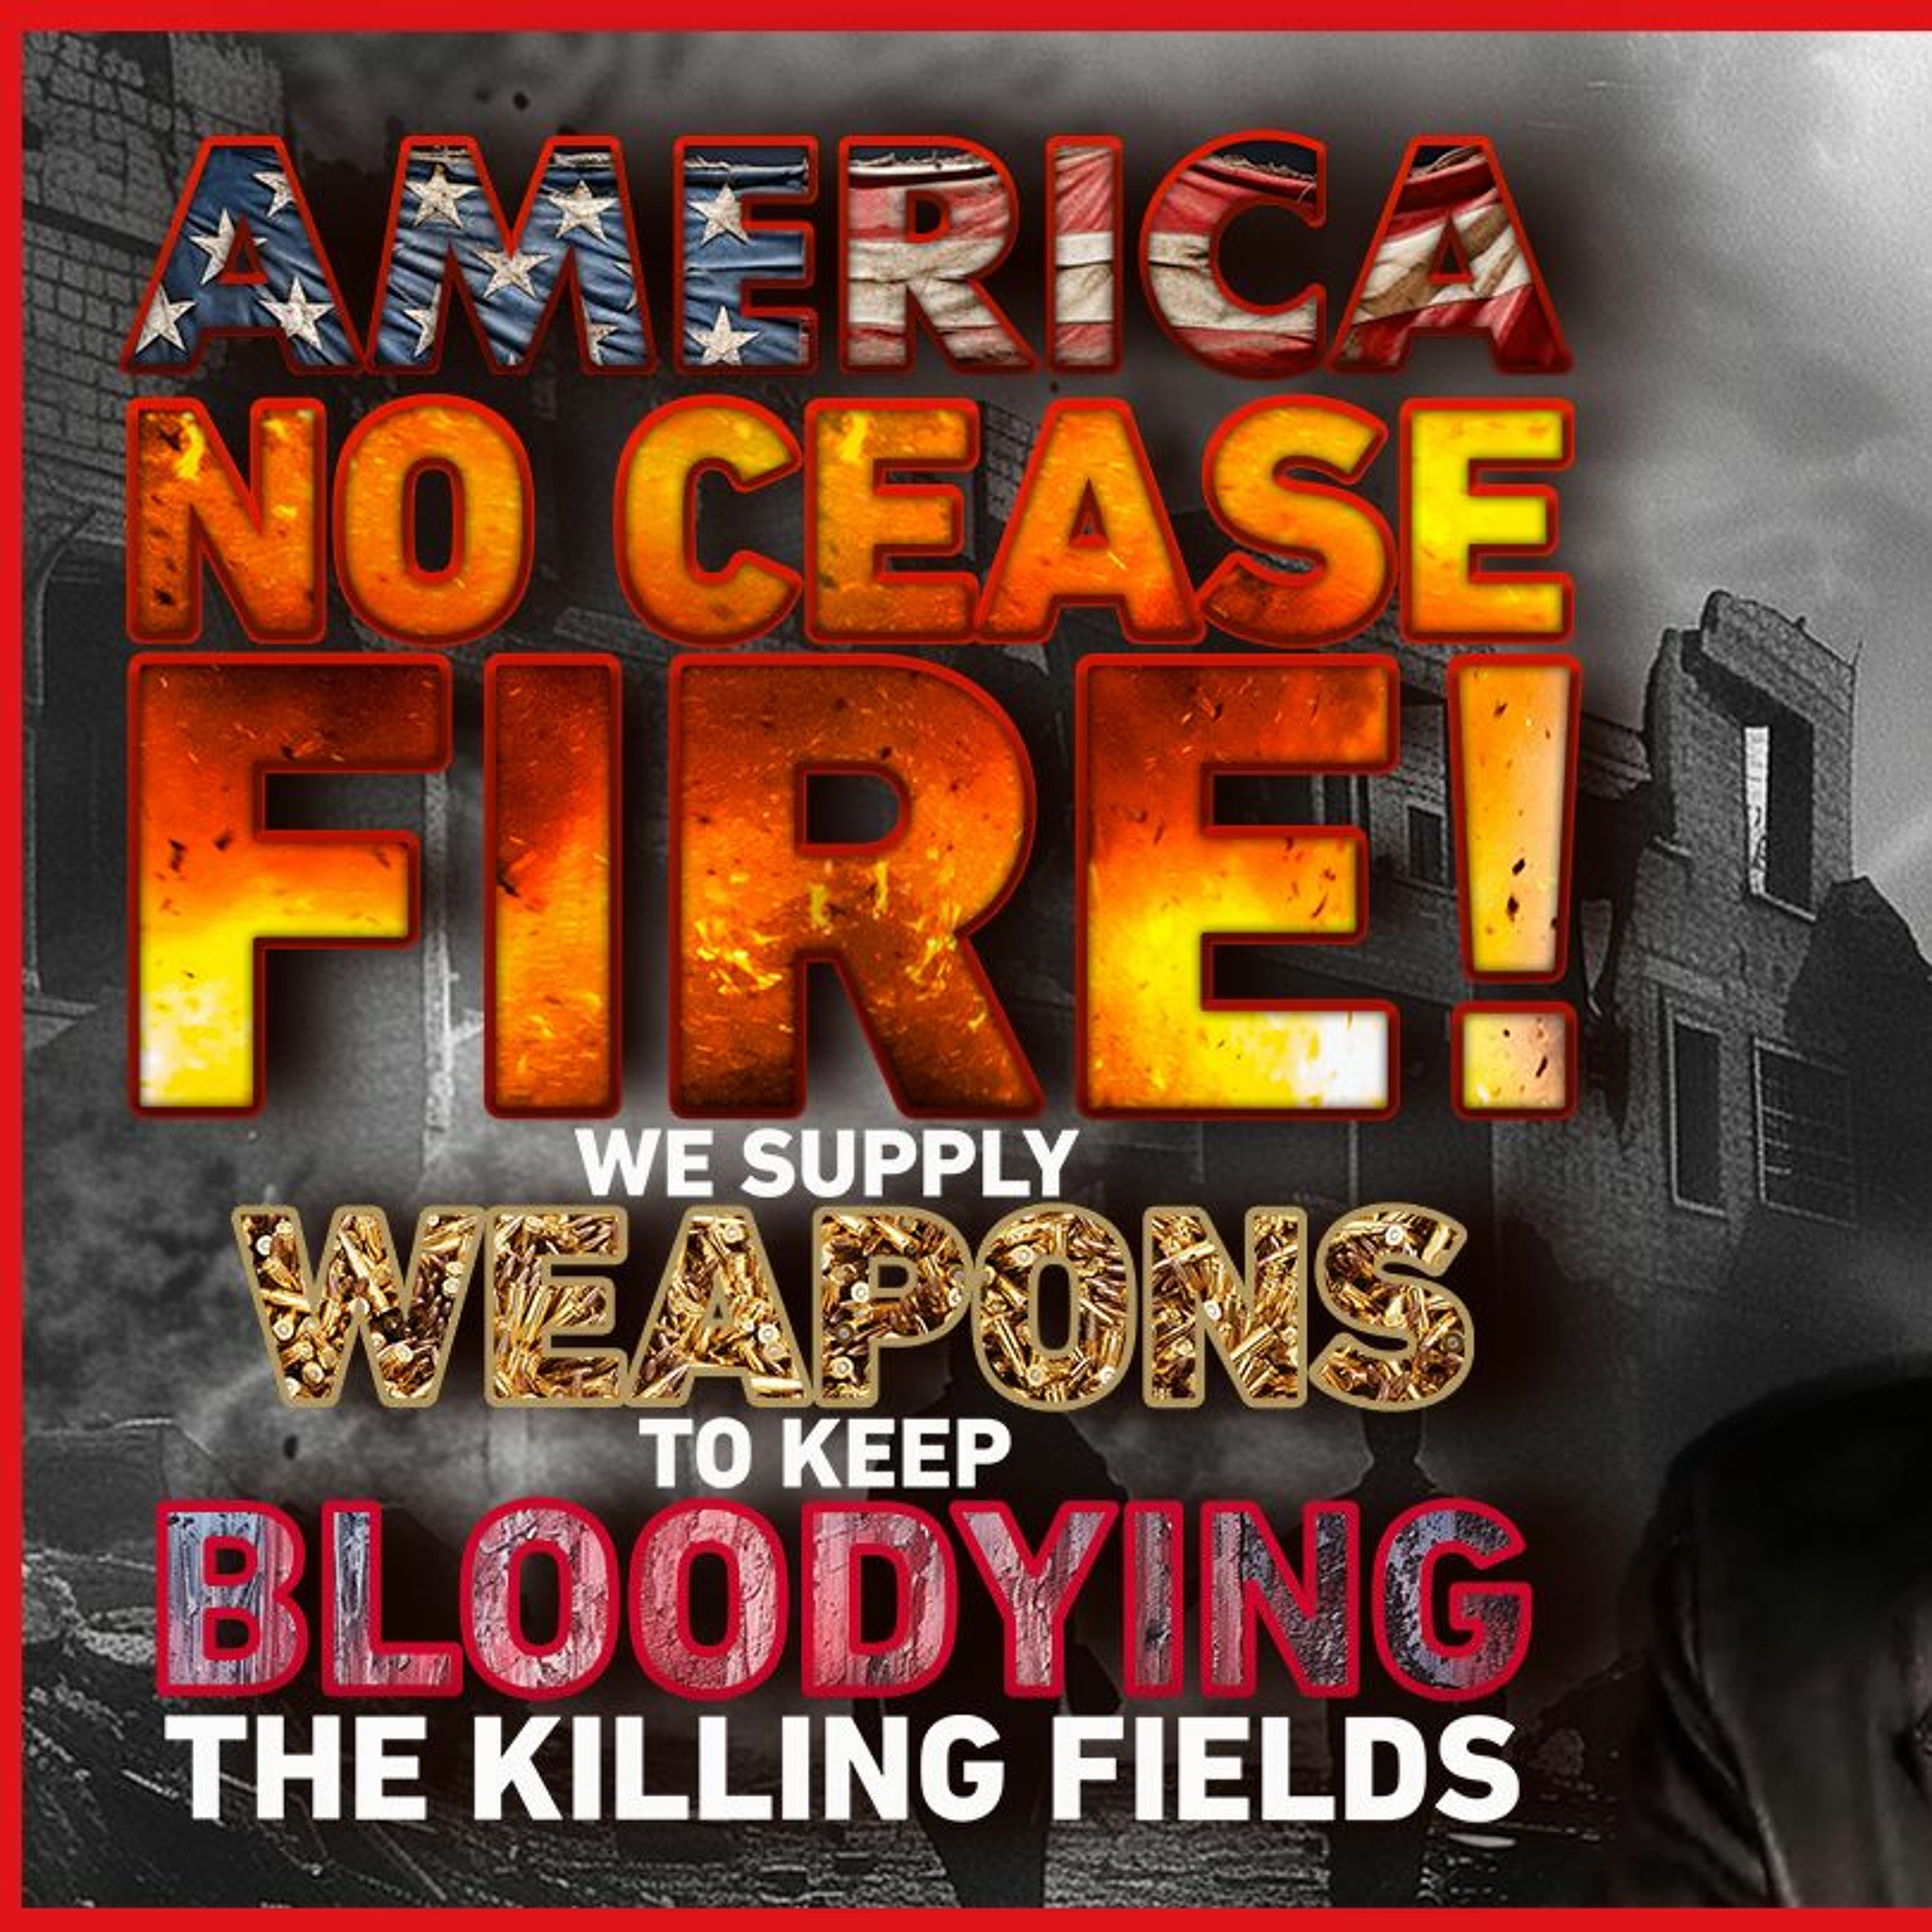 AMERICA: NO CEASEFIRE! WE SUPPLY THE WEAPONS TO KEEPY BLOODYING THE KILLING FIELDS